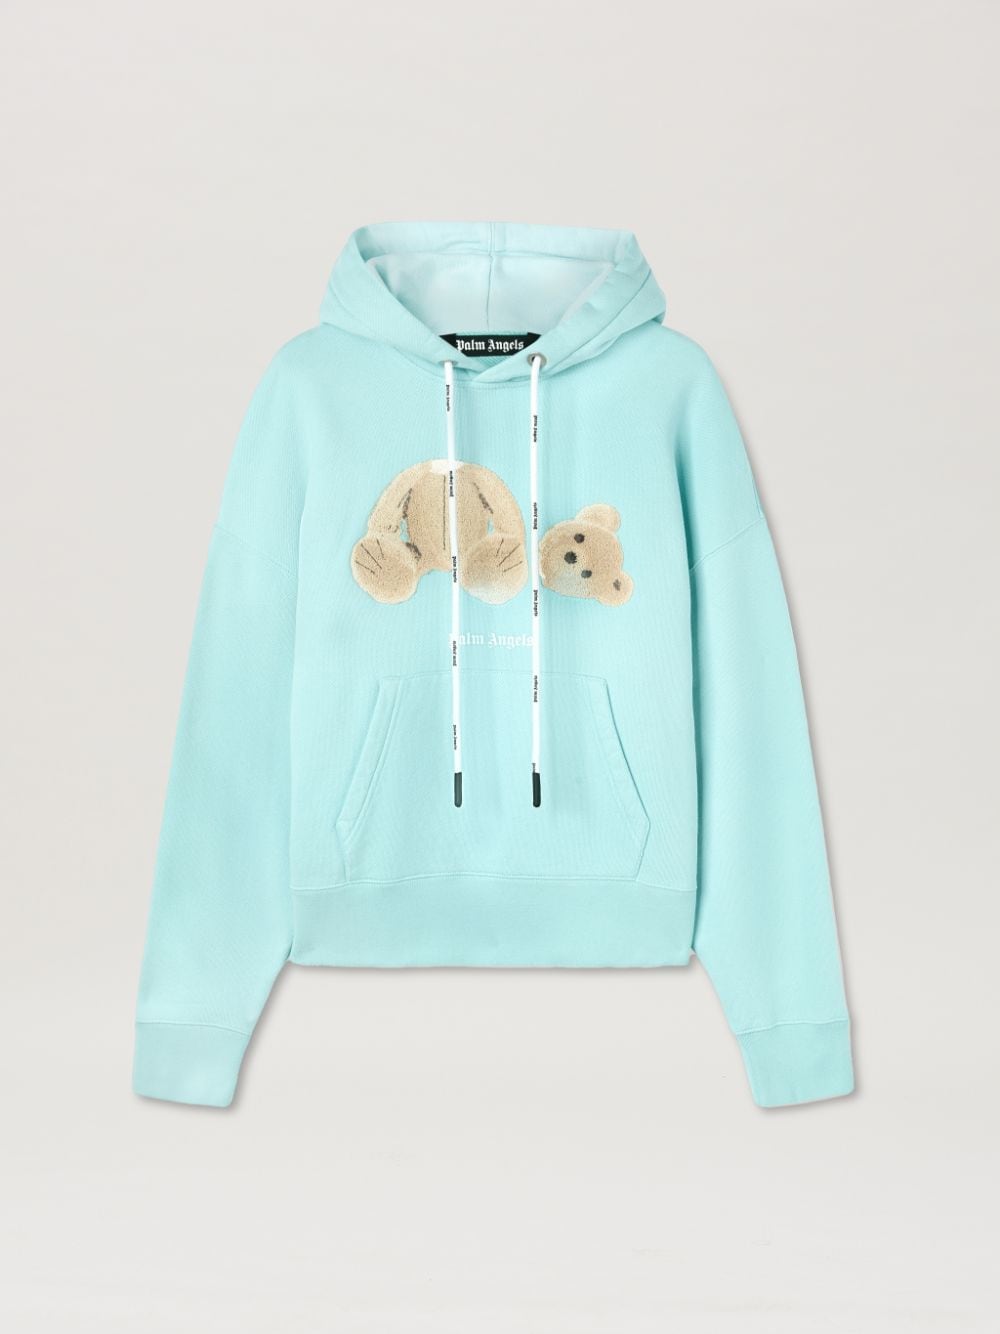 Bear Hoody in blue - Palm Angels® Official